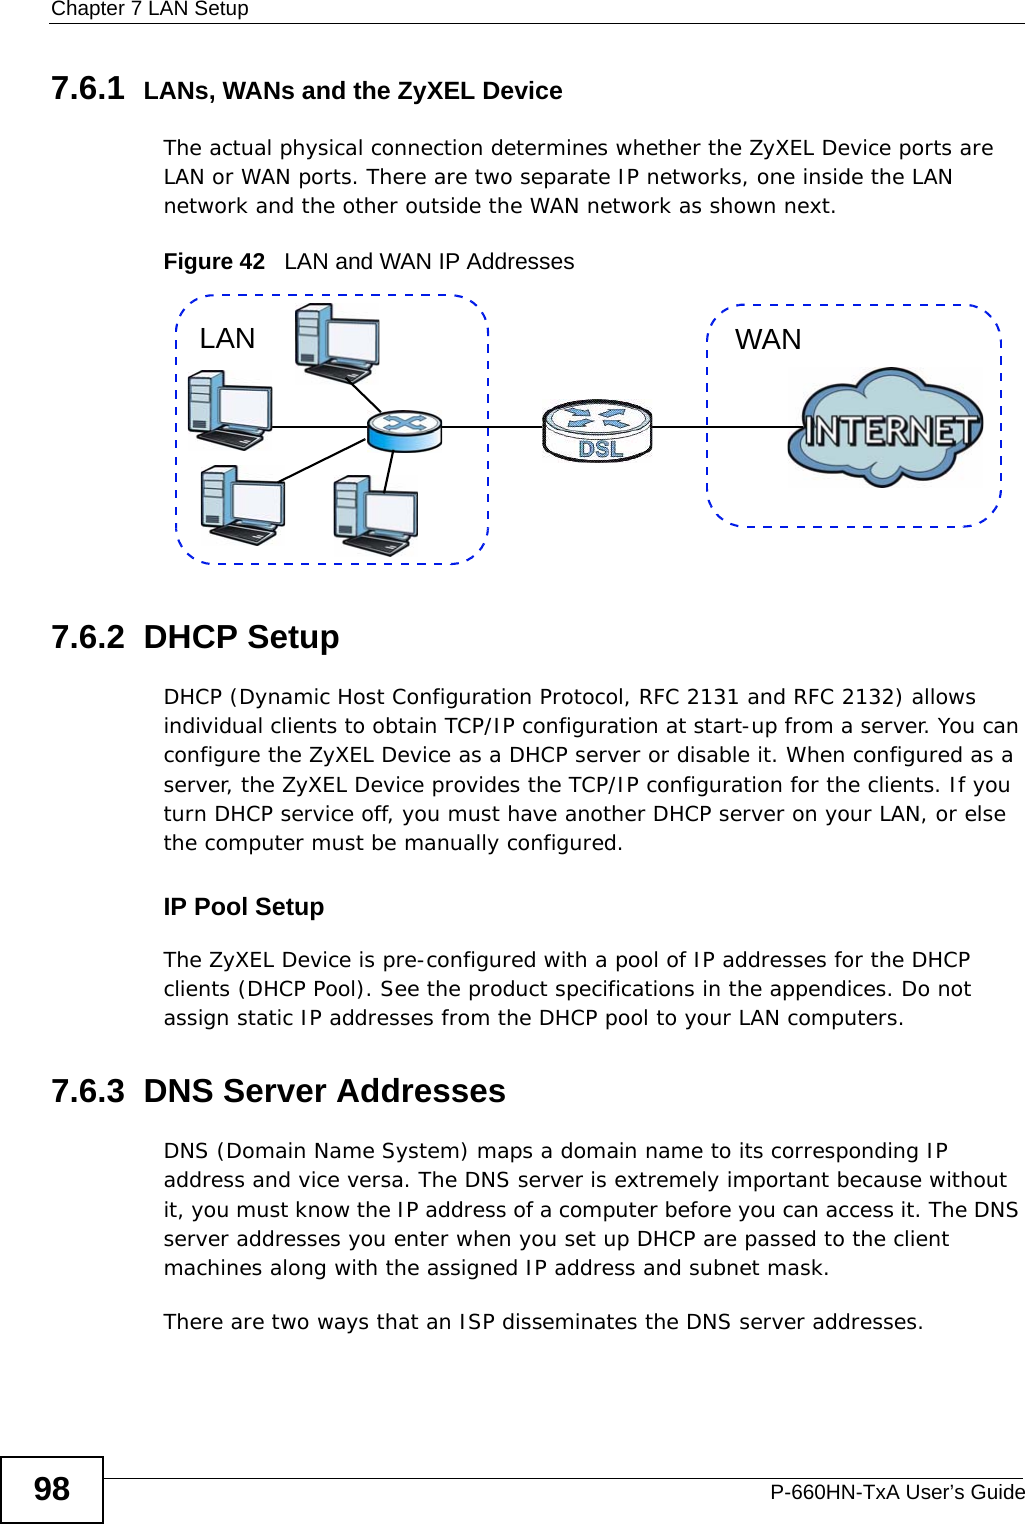 Chapter 7 LAN SetupP-660HN-TxA User’s Guide987.6.1  LANs, WANs and the ZyXEL DeviceThe actual physical connection determines whether the ZyXEL Device ports are LAN or WAN ports. There are two separate IP networks, one inside the LAN network and the other outside the WAN network as shown next.Figure 42   LAN and WAN IP Addresses7.6.2  DHCP SetupDHCP (Dynamic Host Configuration Protocol, RFC 2131 and RFC 2132) allows individual clients to obtain TCP/IP configuration at start-up from a server. You can configure the ZyXEL Device as a DHCP server or disable it. When configured as a server, the ZyXEL Device provides the TCP/IP configuration for the clients. If you turn DHCP service off, you must have another DHCP server on your LAN, or else the computer must be manually configured. IP Pool SetupThe ZyXEL Device is pre-configured with a pool of IP addresses for the DHCP clients (DHCP Pool). See the product specifications in the appendices. Do not assign static IP addresses from the DHCP pool to your LAN computers.7.6.3  DNS Server Addresses DNS (Domain Name System) maps a domain name to its corresponding IP address and vice versa. The DNS server is extremely important because without it, you must know the IP address of a computer before you can access it. The DNS server addresses you enter when you set up DHCP are passed to the client machines along with the assigned IP address and subnet mask.There are two ways that an ISP disseminates the DNS server addresses. WANLAN